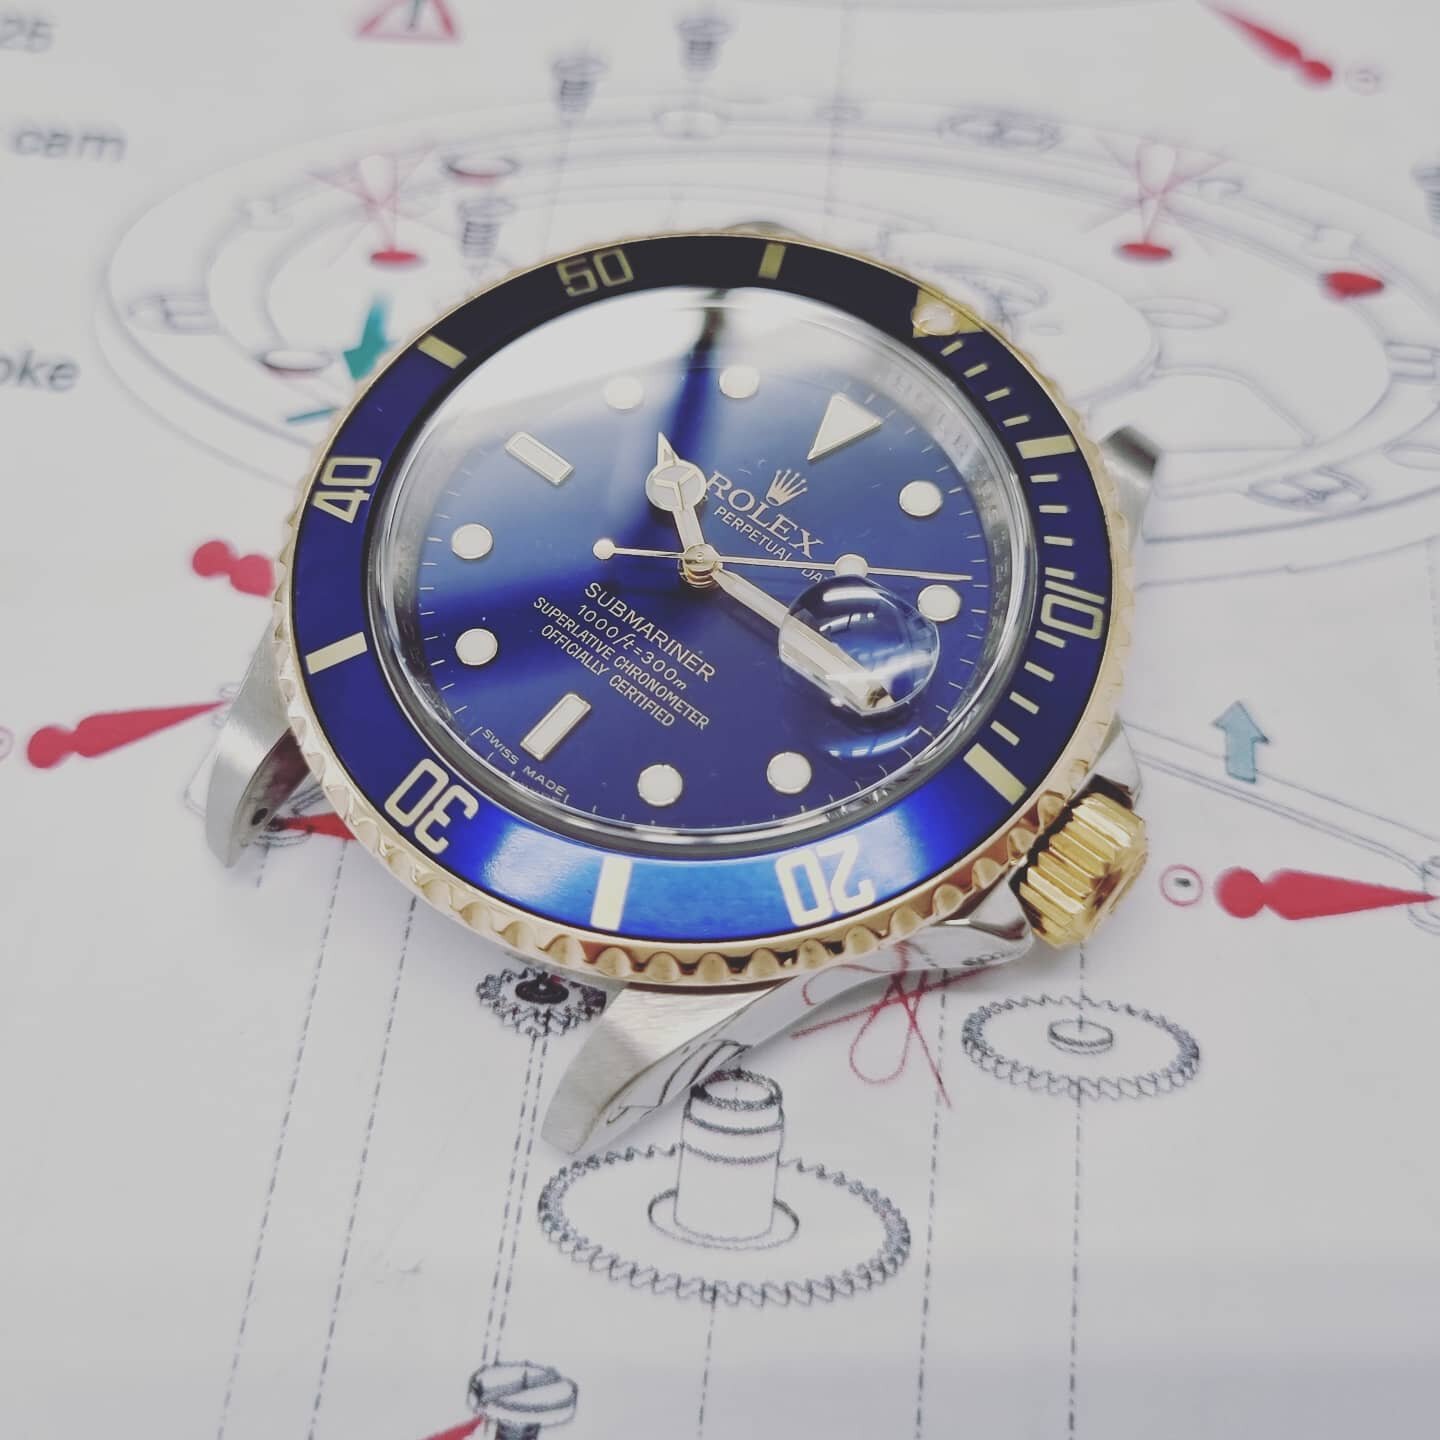 Just finished the service on a Rolex 16613 &quot;BLUESY&quot; beautiful watch running like new #rolex #watch #watchesofinstagram #watchcollector #watchaddict #watches #notts #nottingham #submariner